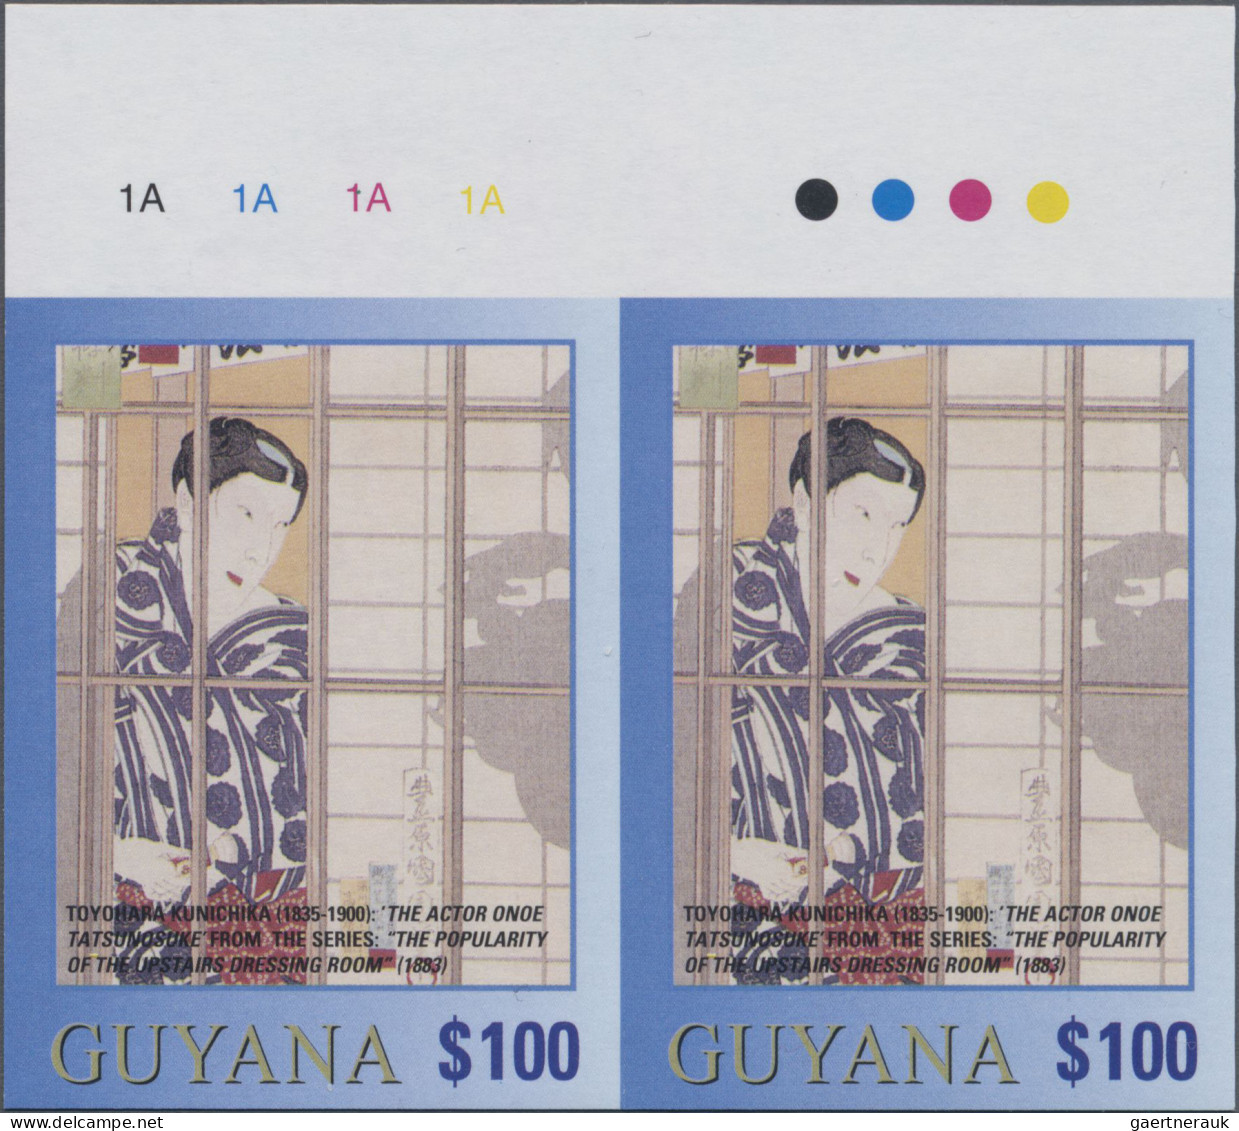 Guyana: 2000/2003. Collection containing 39 IMPERFORATE stamps (inclusive s/s, m